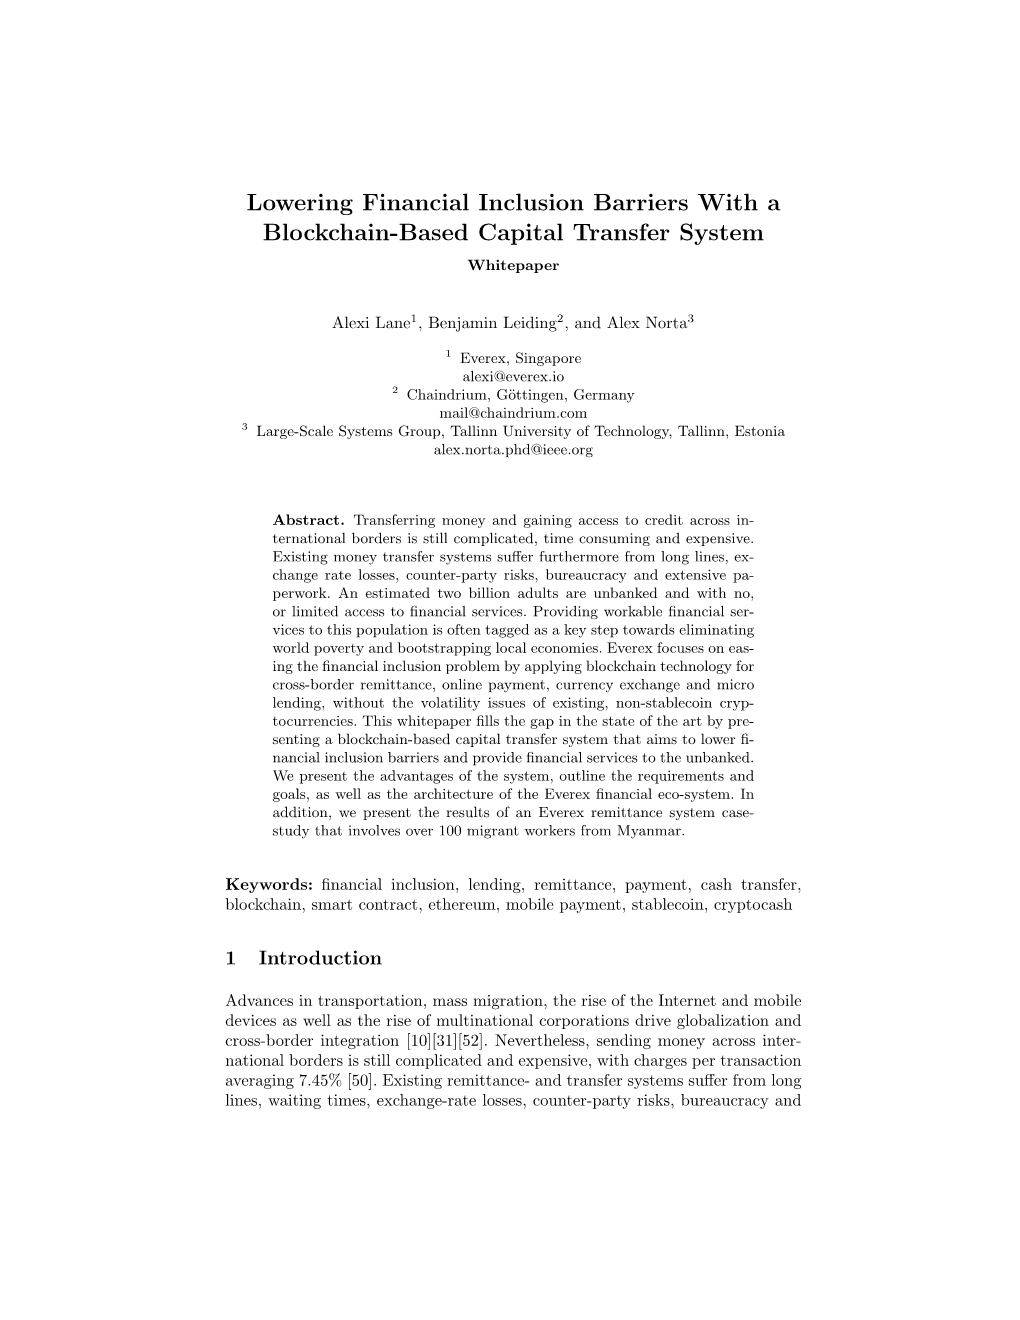 Lowering Financial Inclusion Barriers with a Blockchain-Based Capital Transfer System Whitepaper